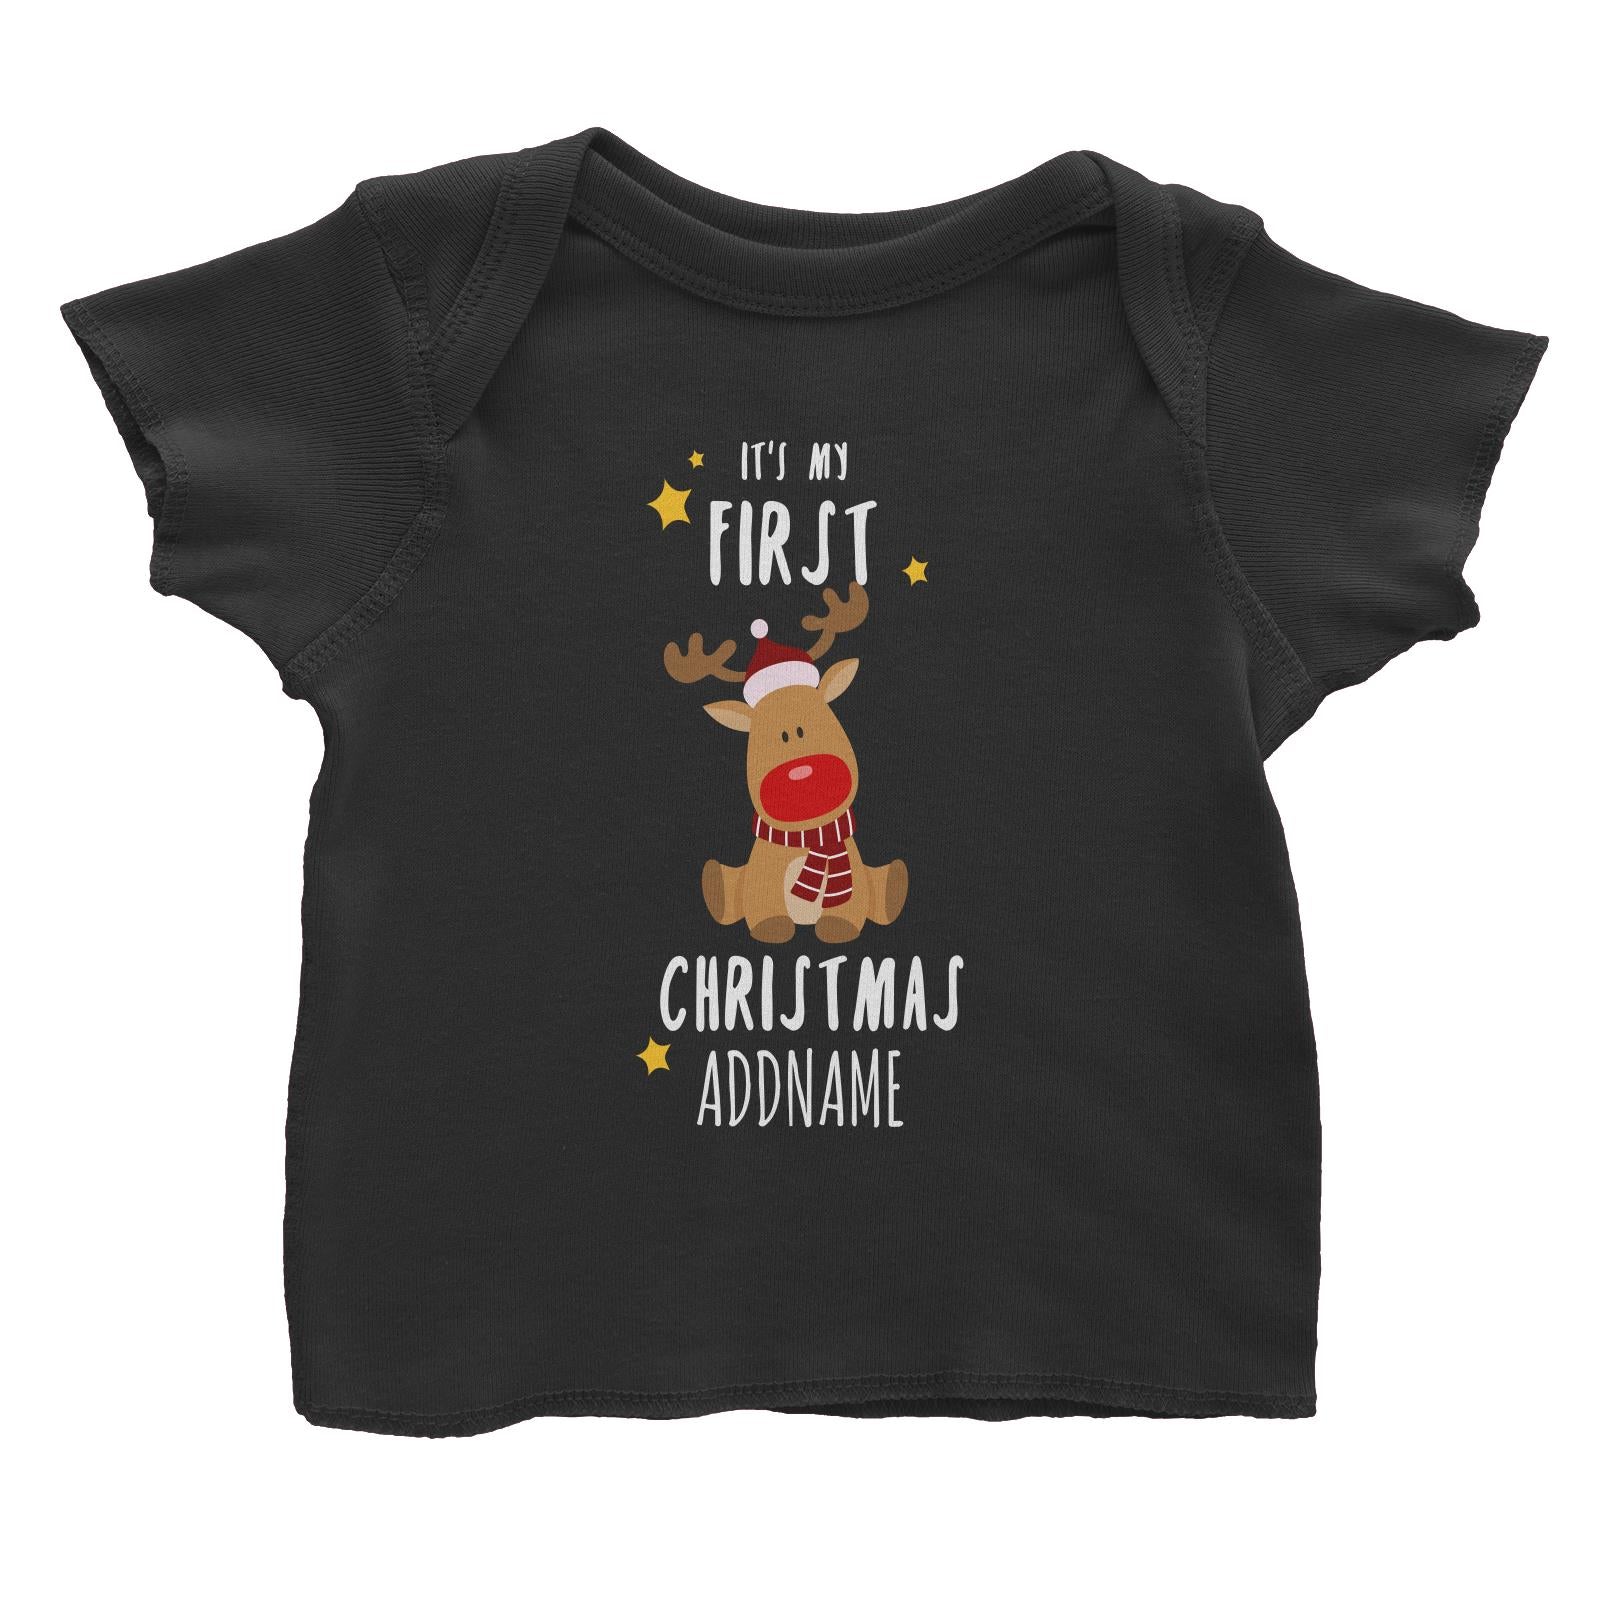 Cute Rudolph First Christmas Addname Baby T-Shirt  Personalizable Designs Animal